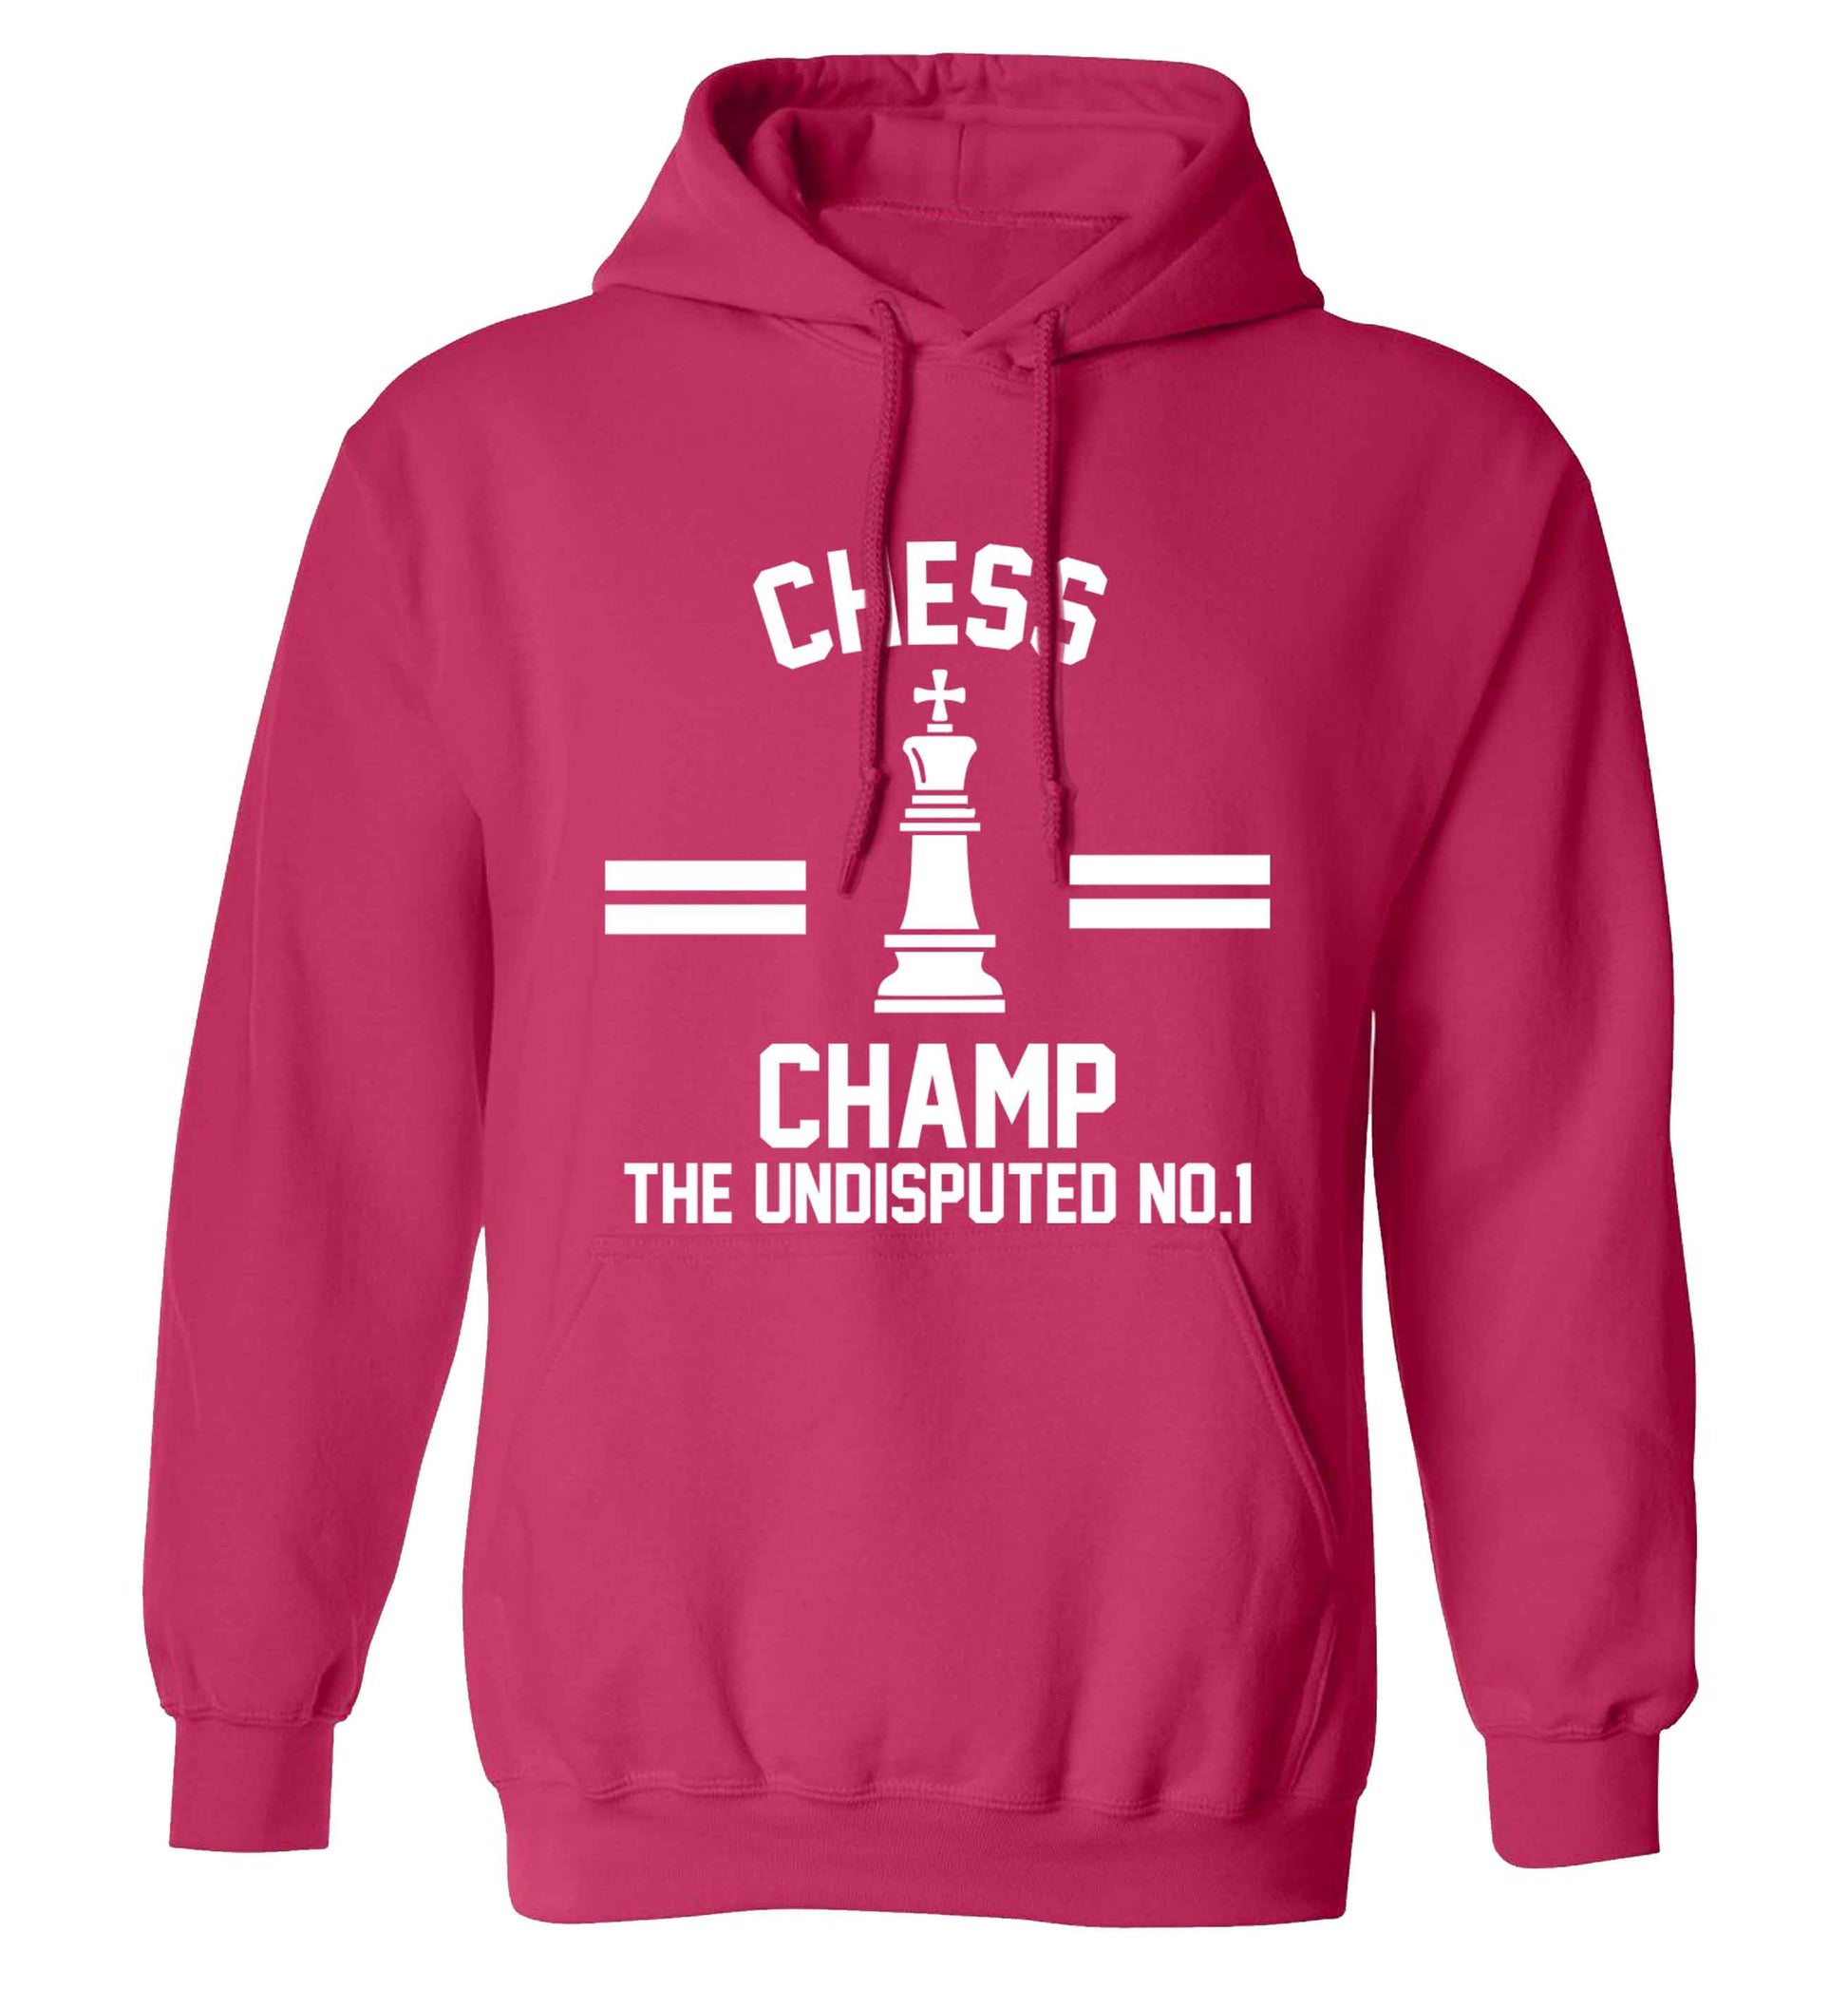 Undisputed chess championship no.1  adults unisex pink hoodie 2XL